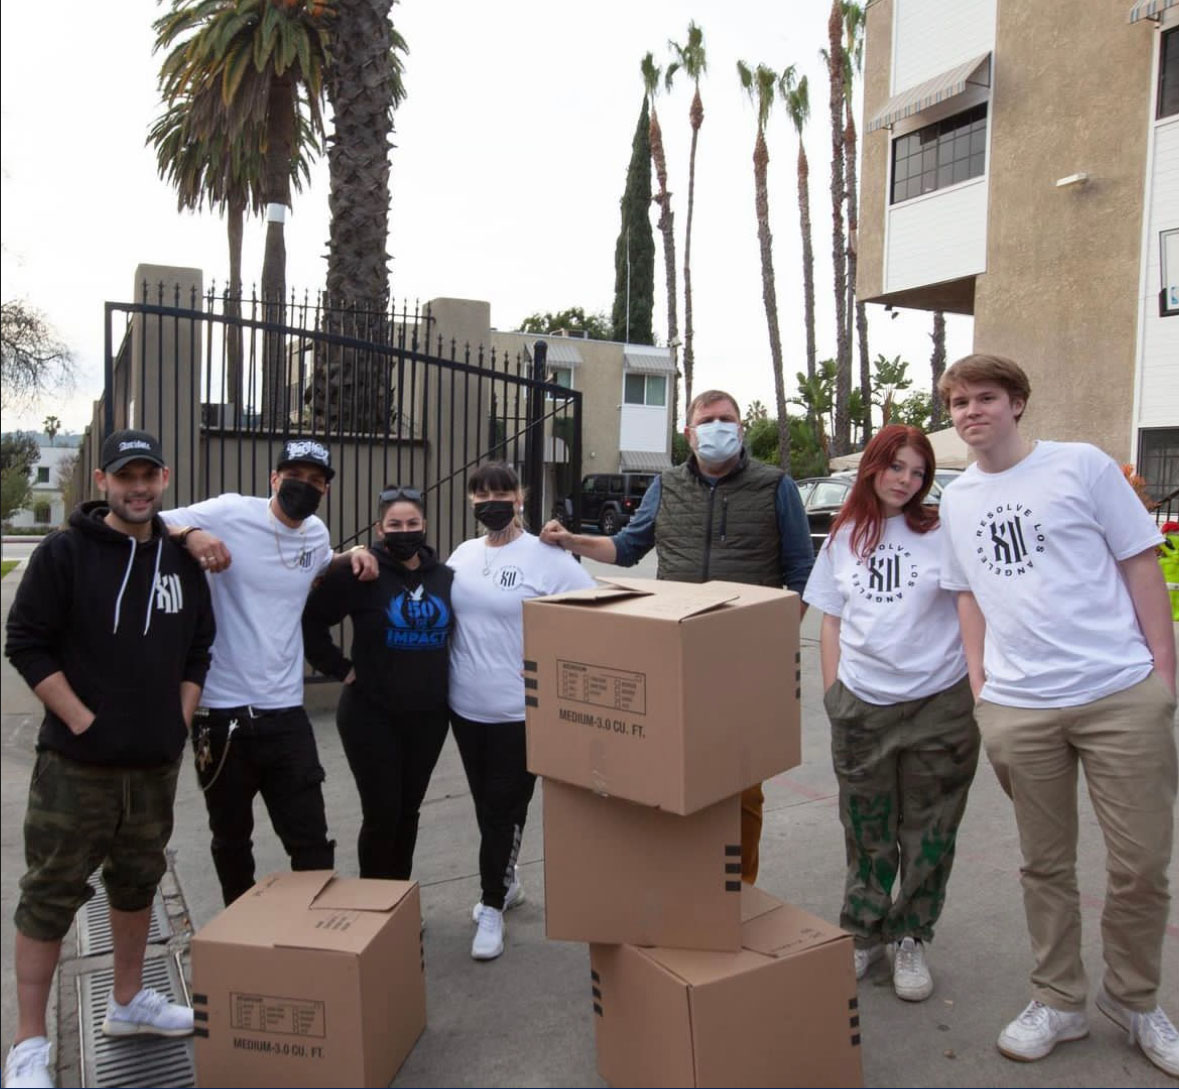 Resolve LA team donating 150 t-shirts to recovery center